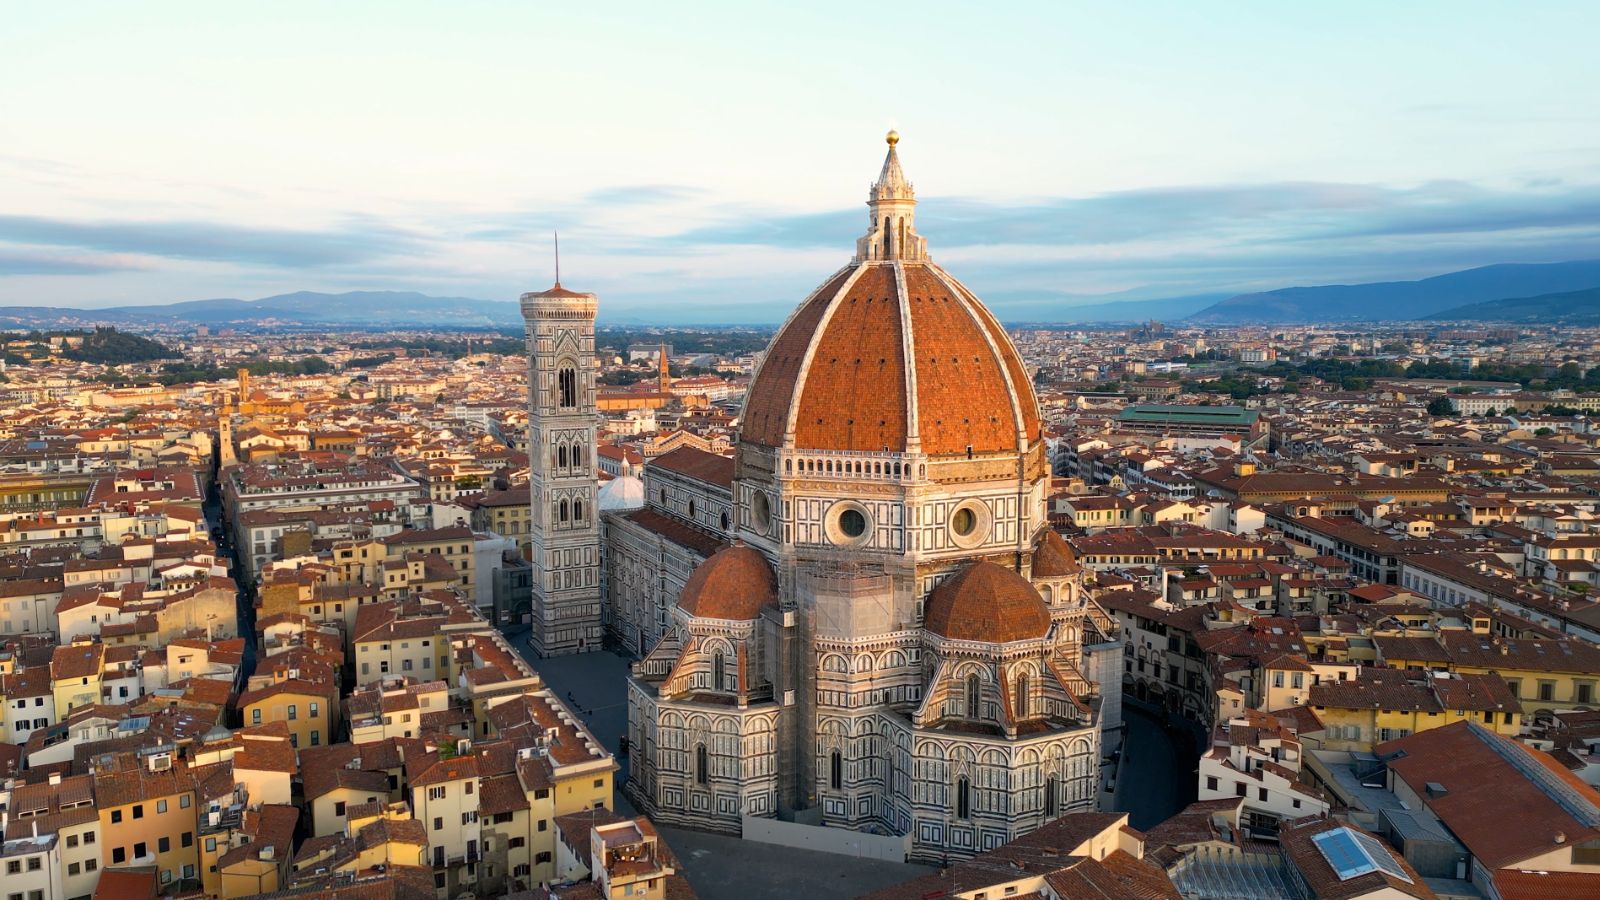 <p>According to <a href="https://www.italymagazine.com/dual-language/wonders-italy-florences-cathedral">Italy Magazine</a>, Florence’s cathedral features a beautiful dome designed by Filippo Brunelleschi. Tourists marvel at its architectural brilliance and climb the dome for panoramic views of Florence. At 153 m long, 90 m wide, and 90 m high, it is the third-largest church in the world.</p>